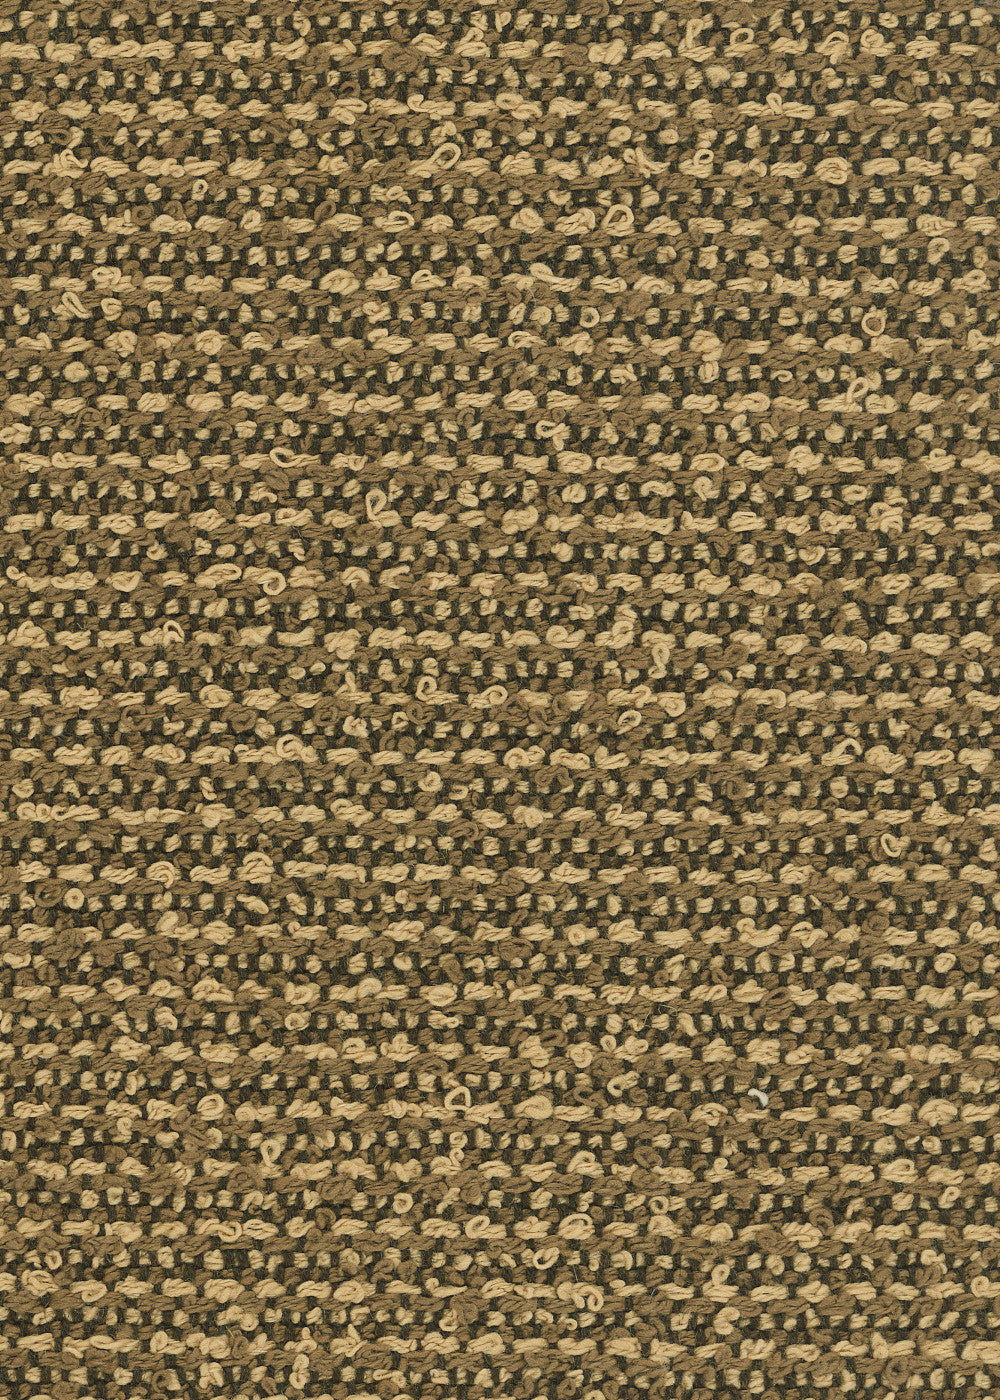 black, brown, and beige boucle upholstery fabric